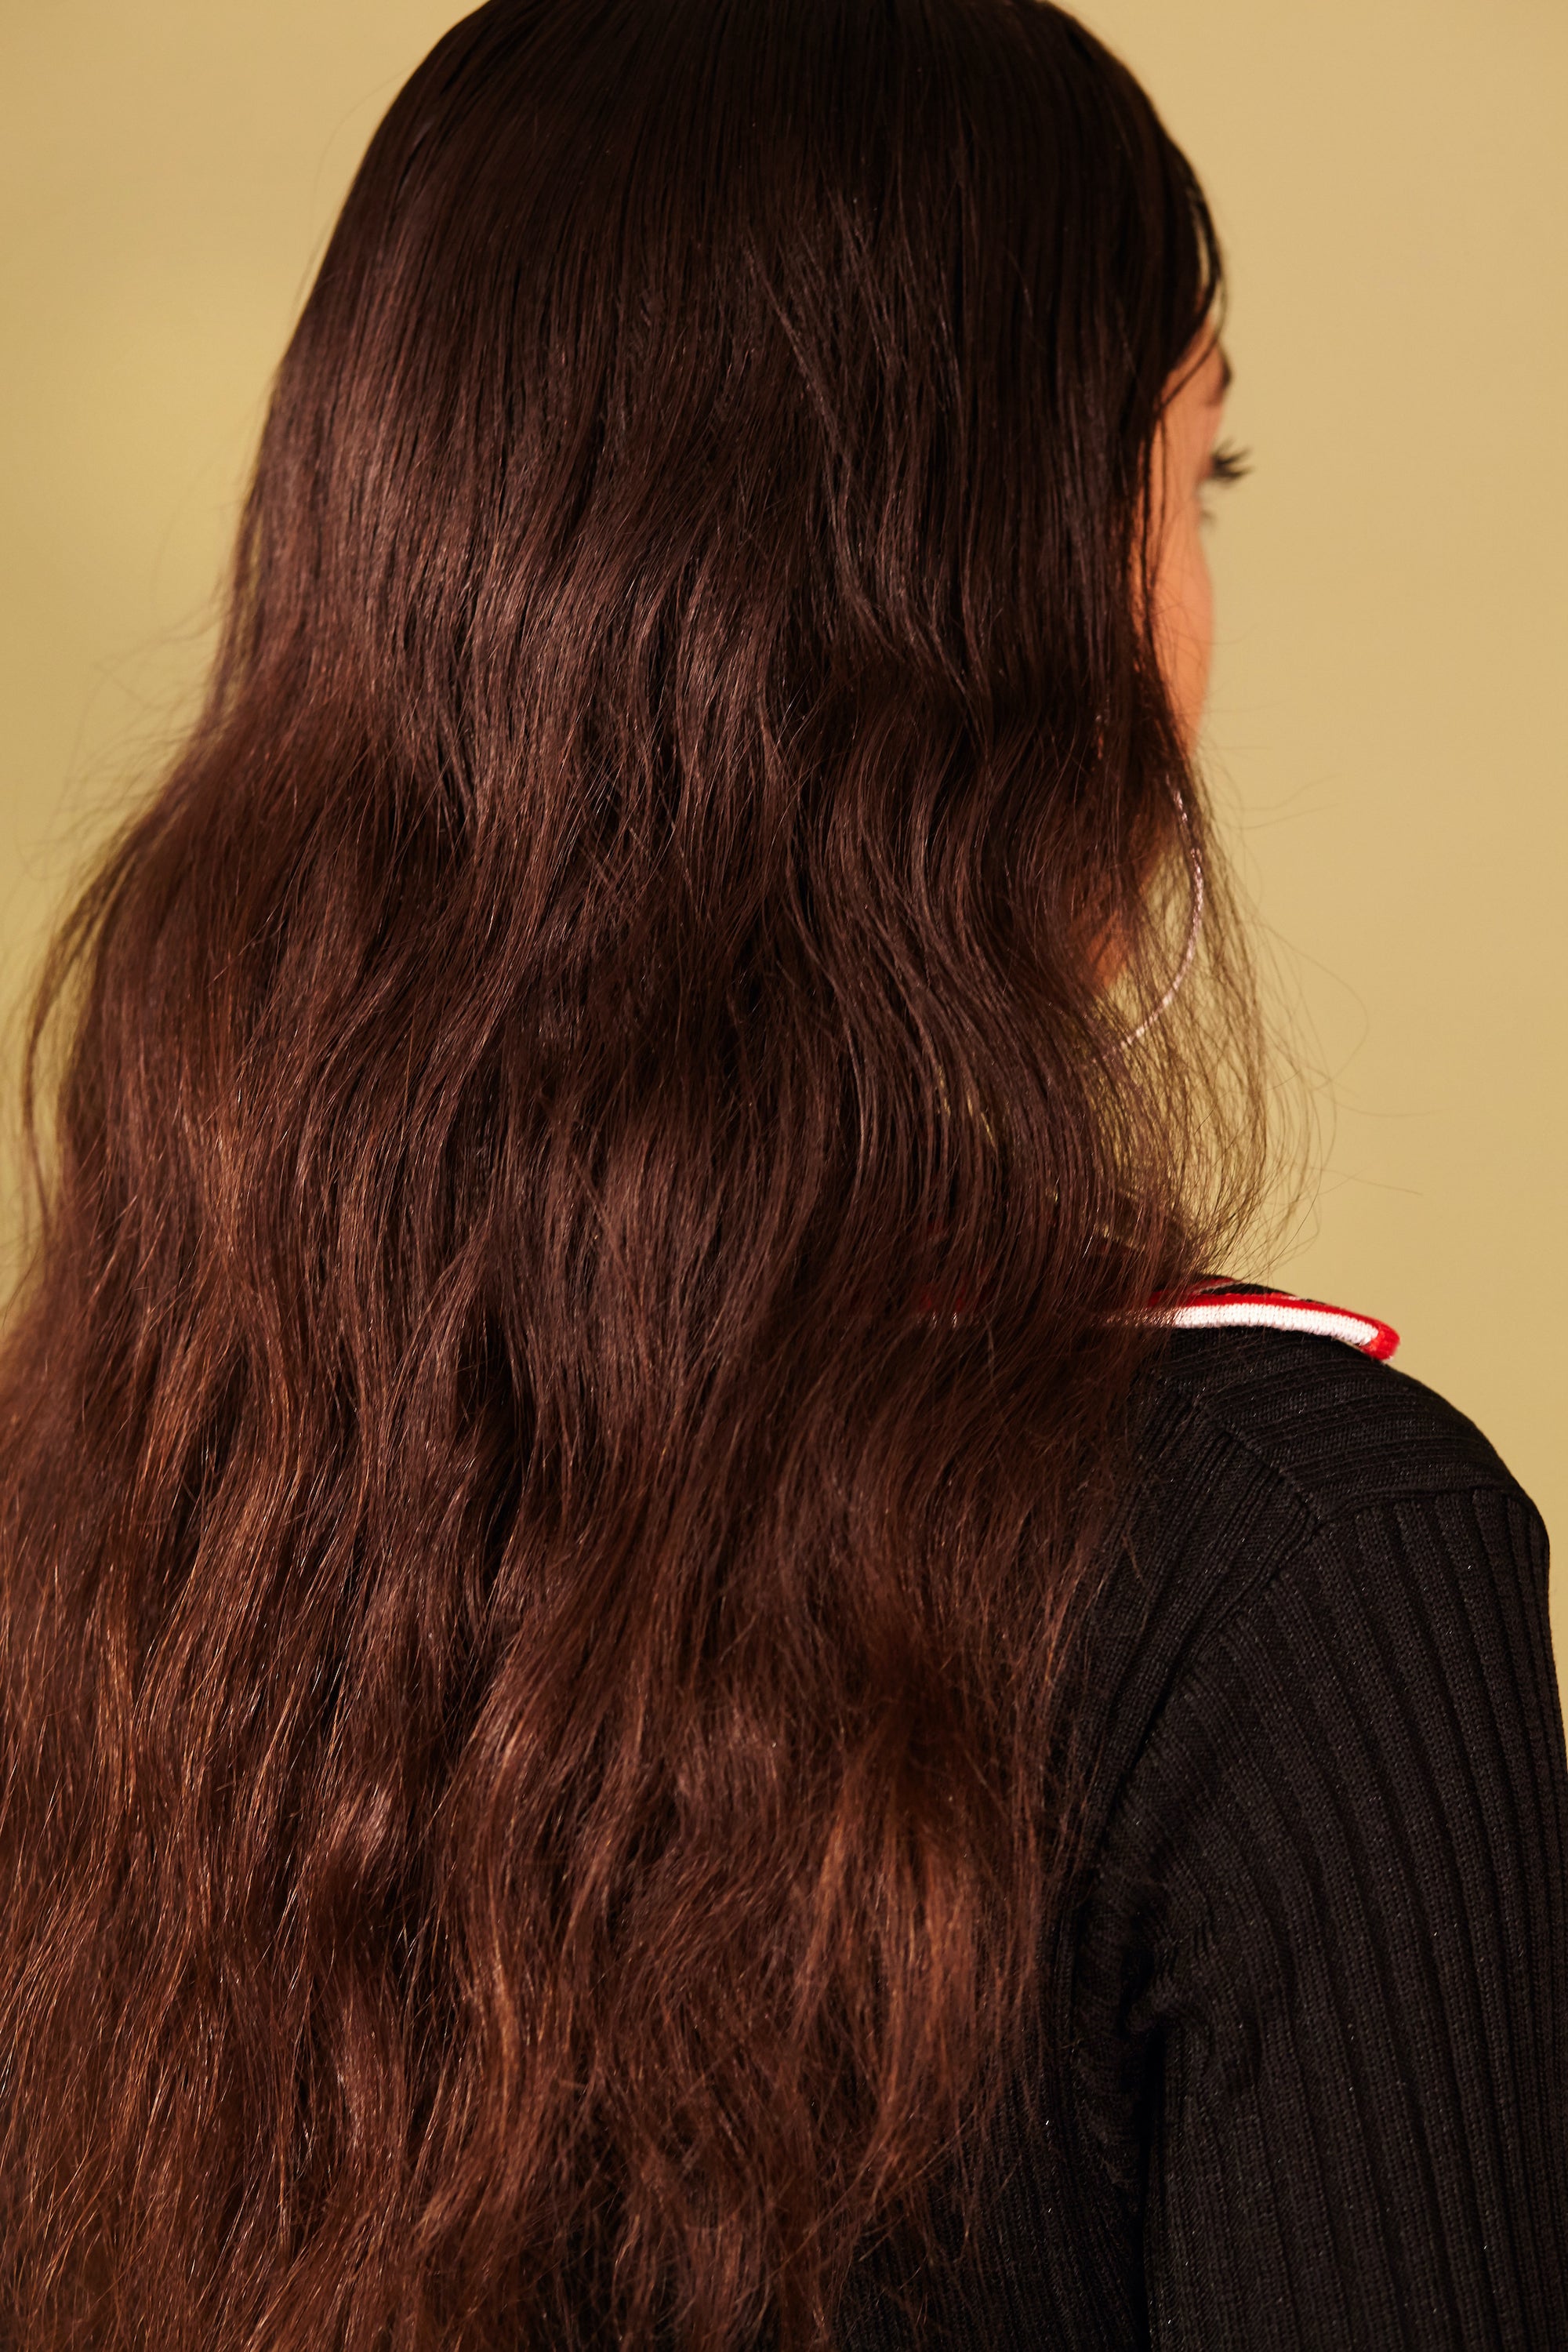 The Only Things That Will Make Your Hair Grow Faster